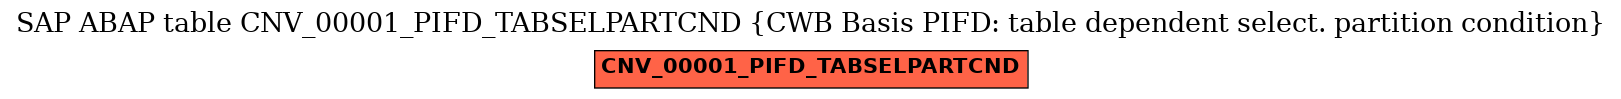 E-R Diagram for table CNV_00001_PIFD_TABSELPARTCND (CWB Basis PIFD: table dependent select. partition condition)